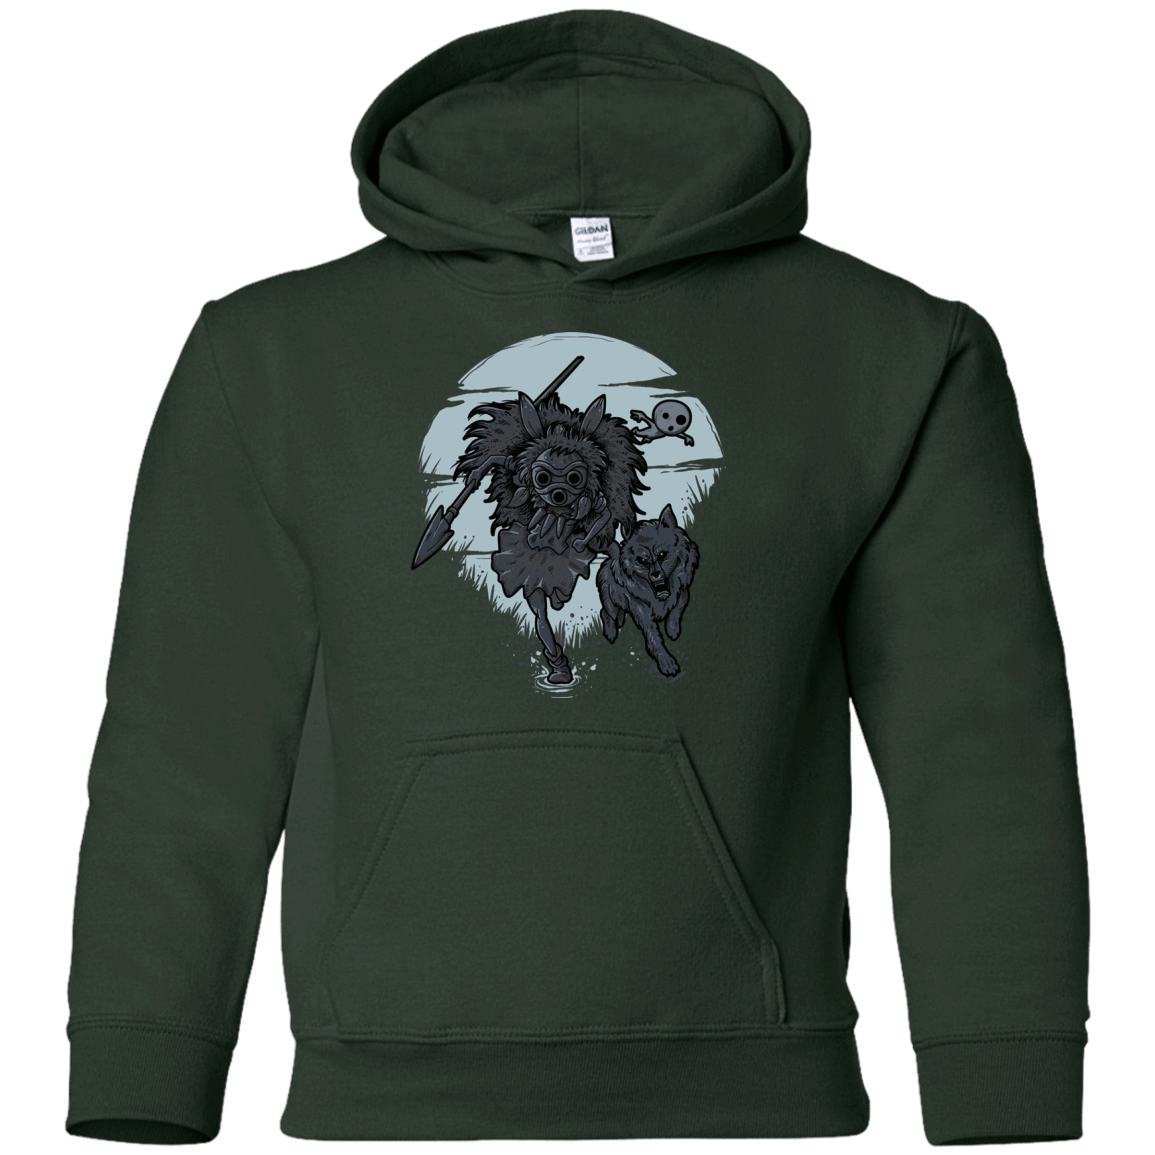 Sweatshirts Forest Green / YS The Princess Youth Hoodie